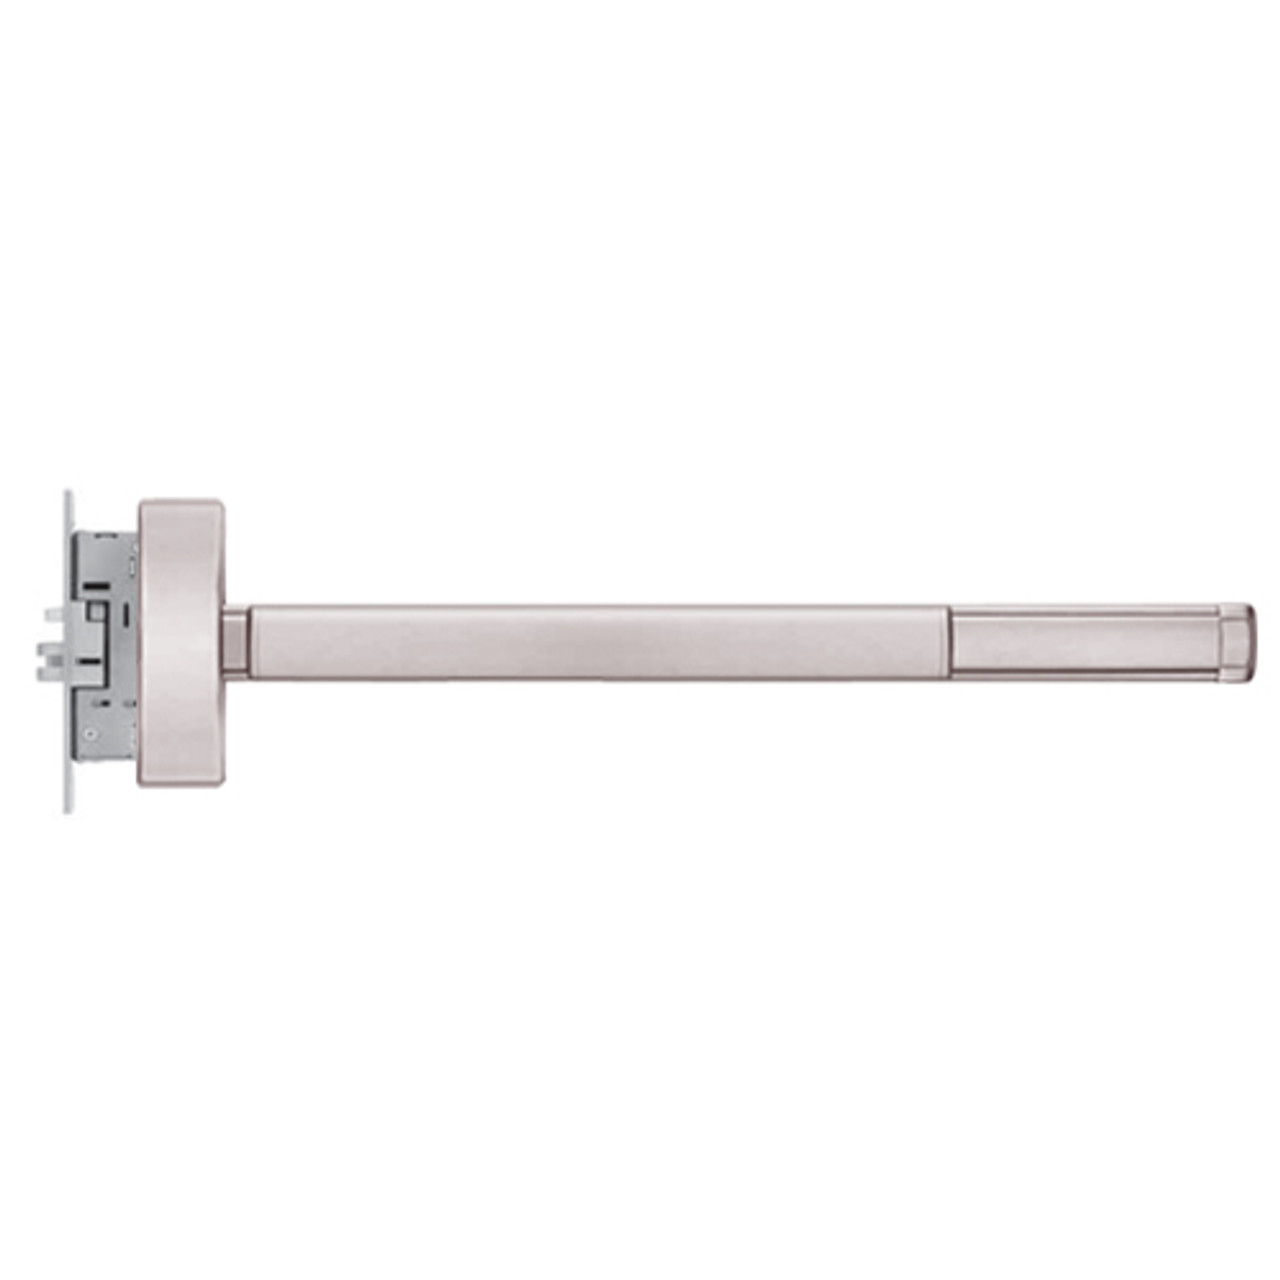 TS2305-RHR-628-36 PHI 2300 Series Apex Mortise Exit Device with Touchbar Monitoring Switch Prepped for Key Controls Thumb Piece in Satin Aluminum Finish